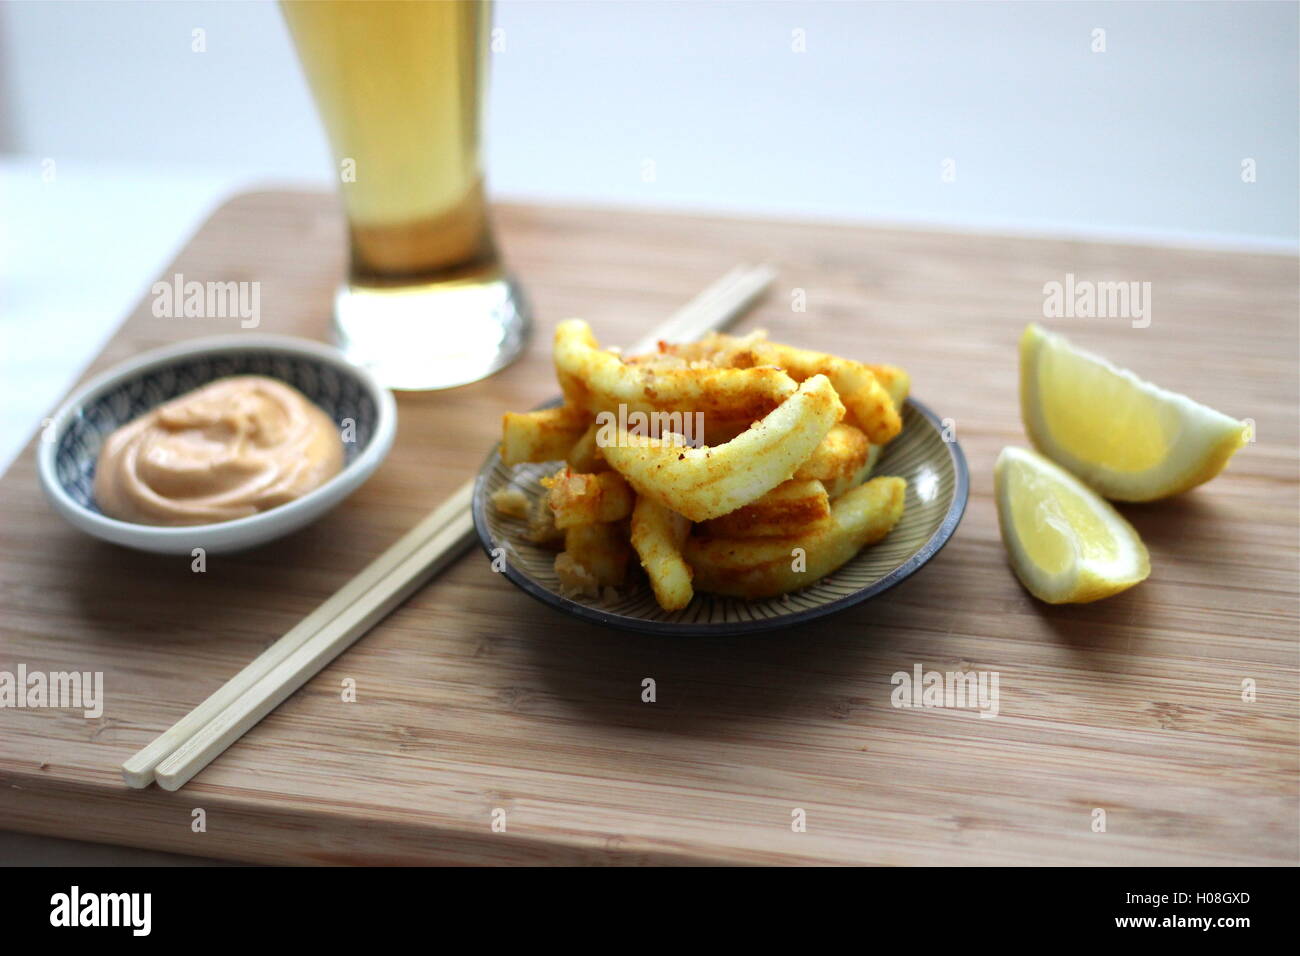 Fried squid on the cutting board Stock Photo